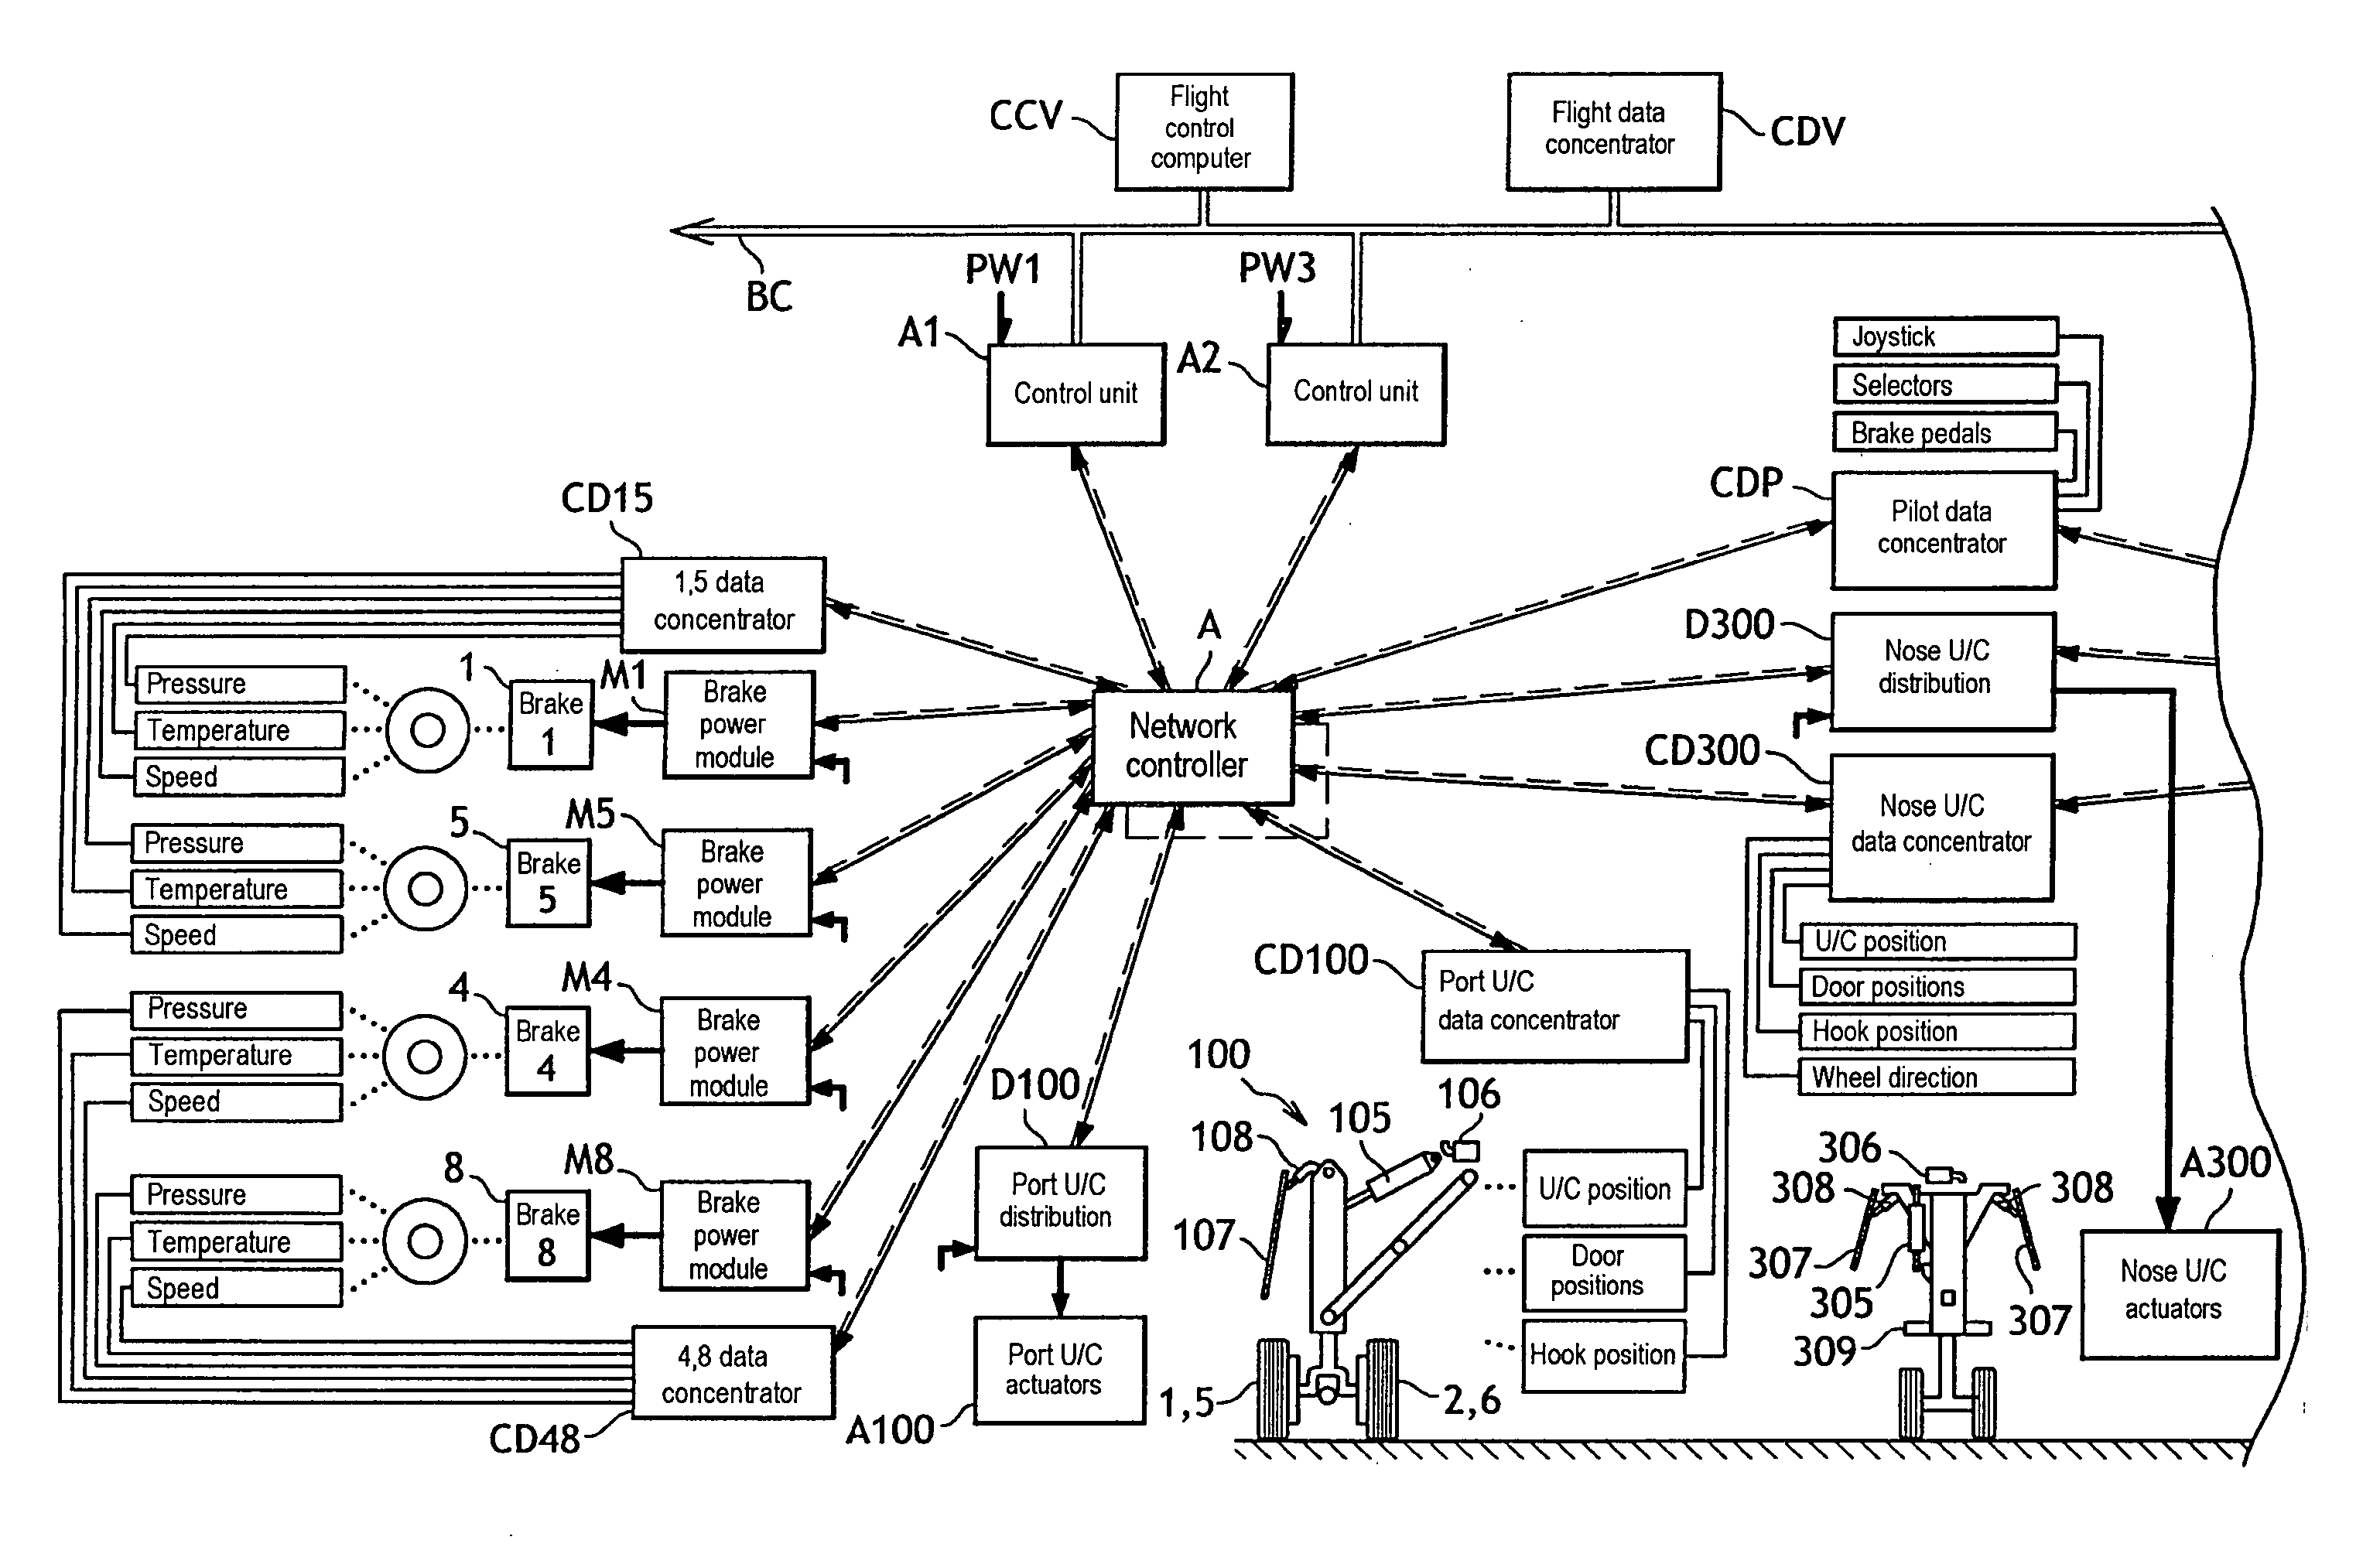 Distributed architecture for a system for managing aircraft landing gear